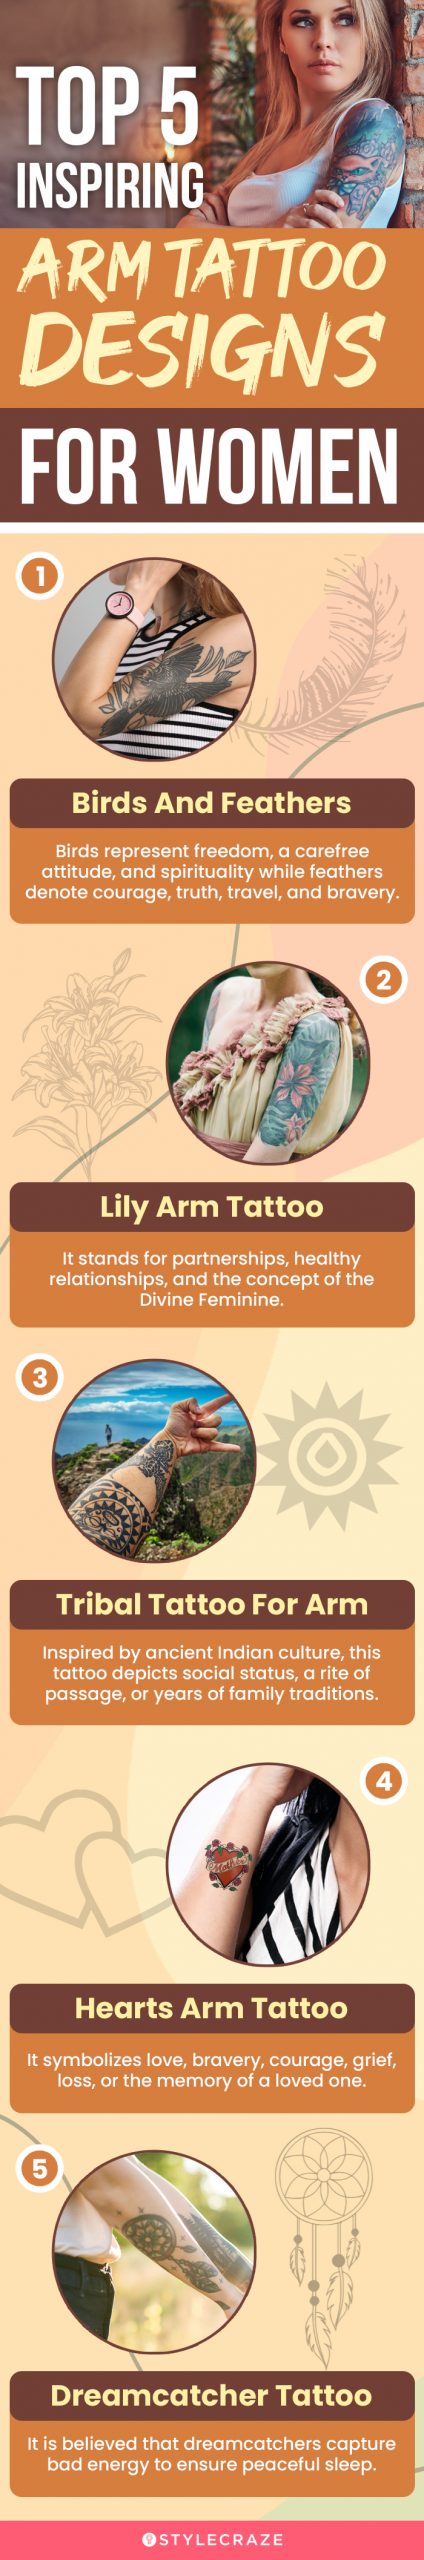 top 5 inspiring arm tattoo designs for women [infographic]